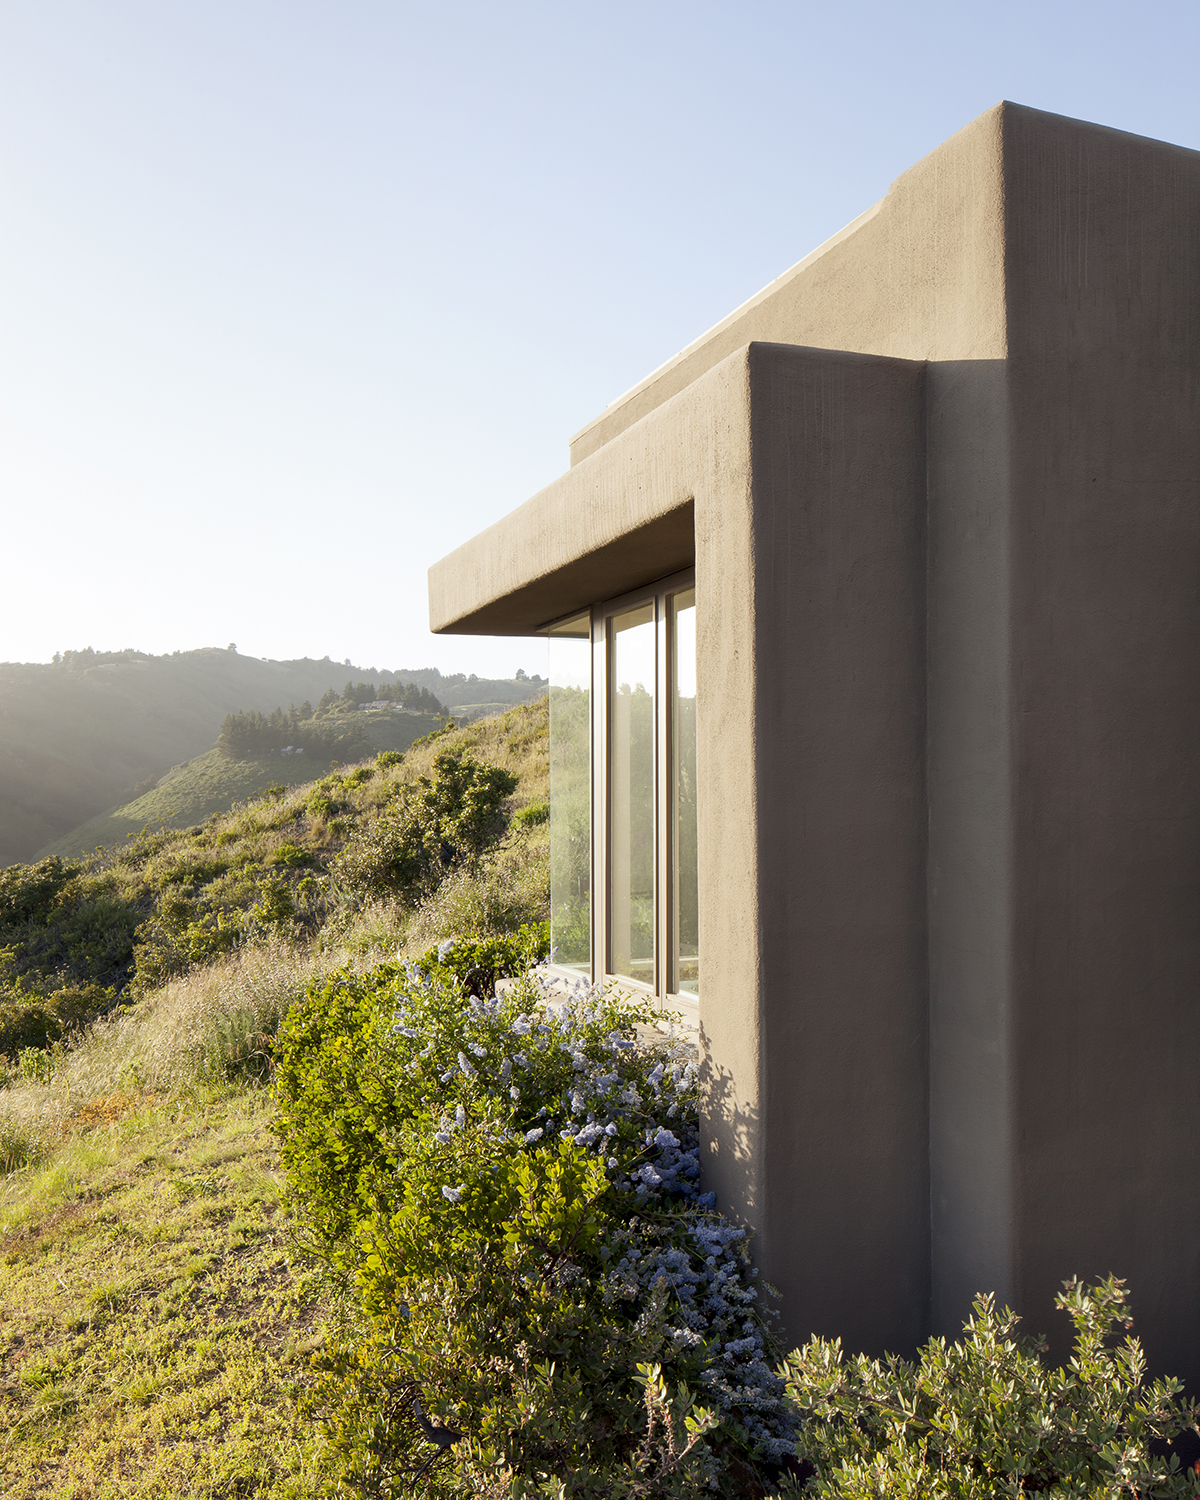  Big Sur House by architect George Brooke Kathlow 